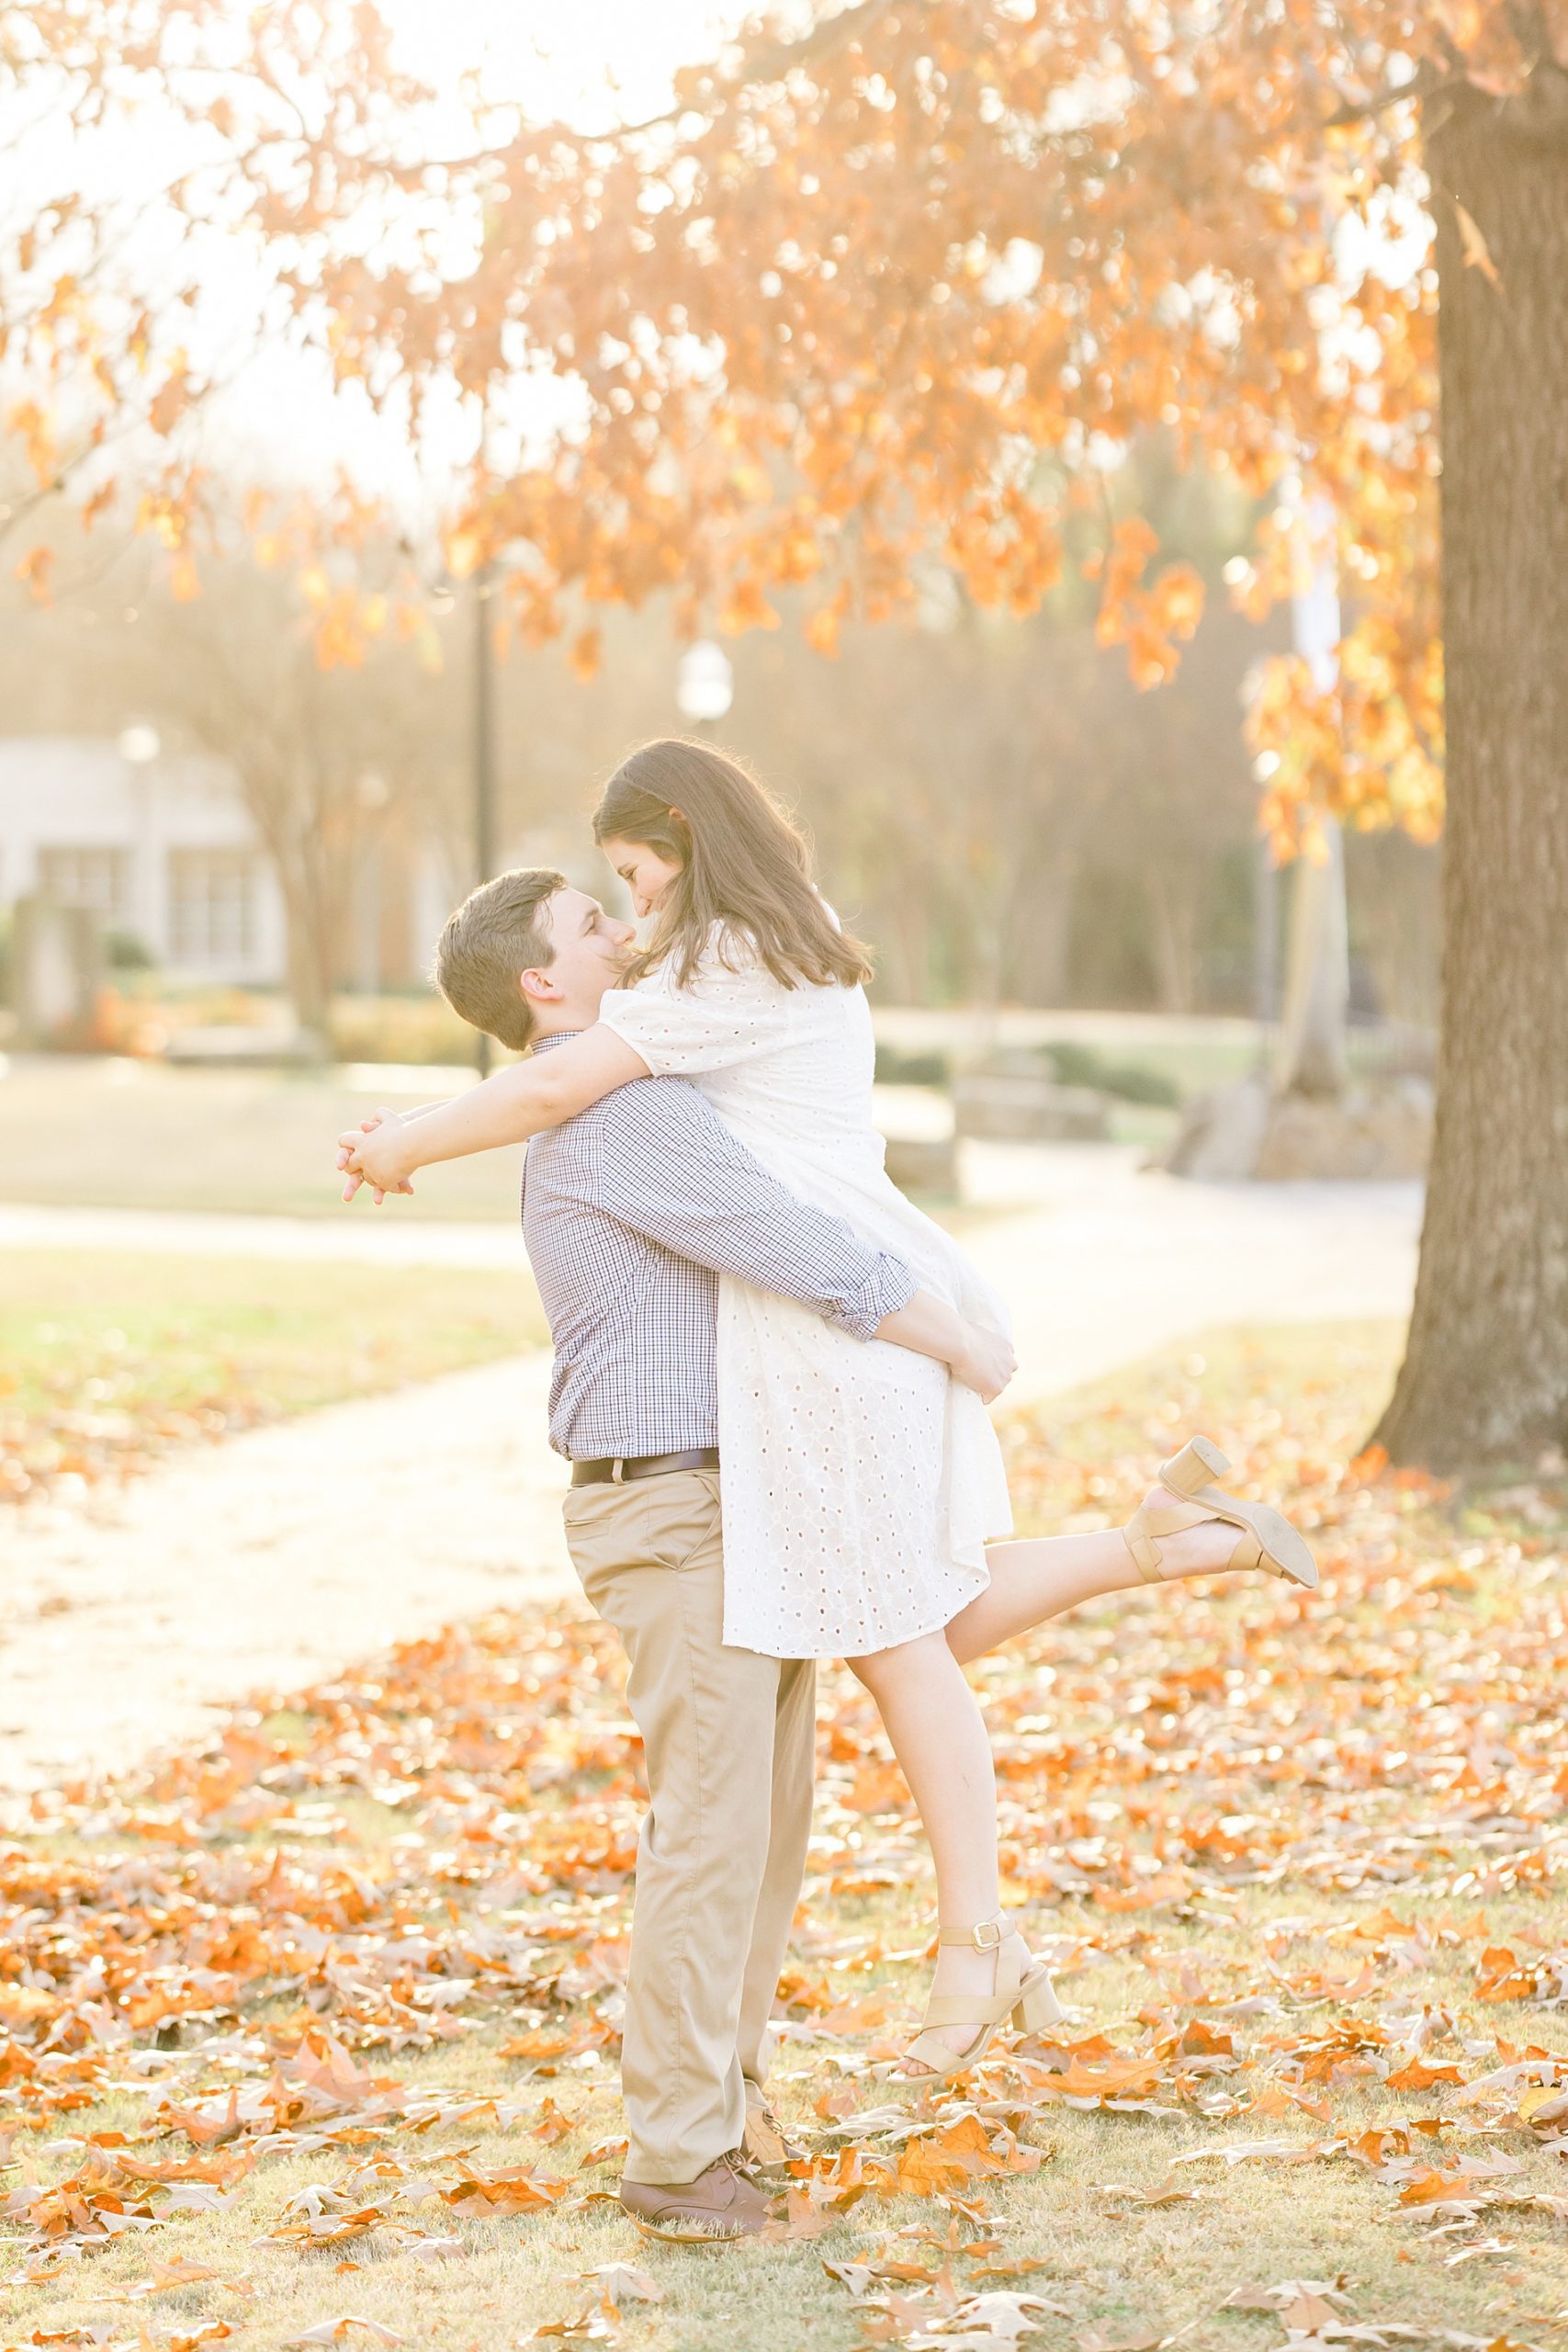 man lifts his fiance up in the fallen leaves